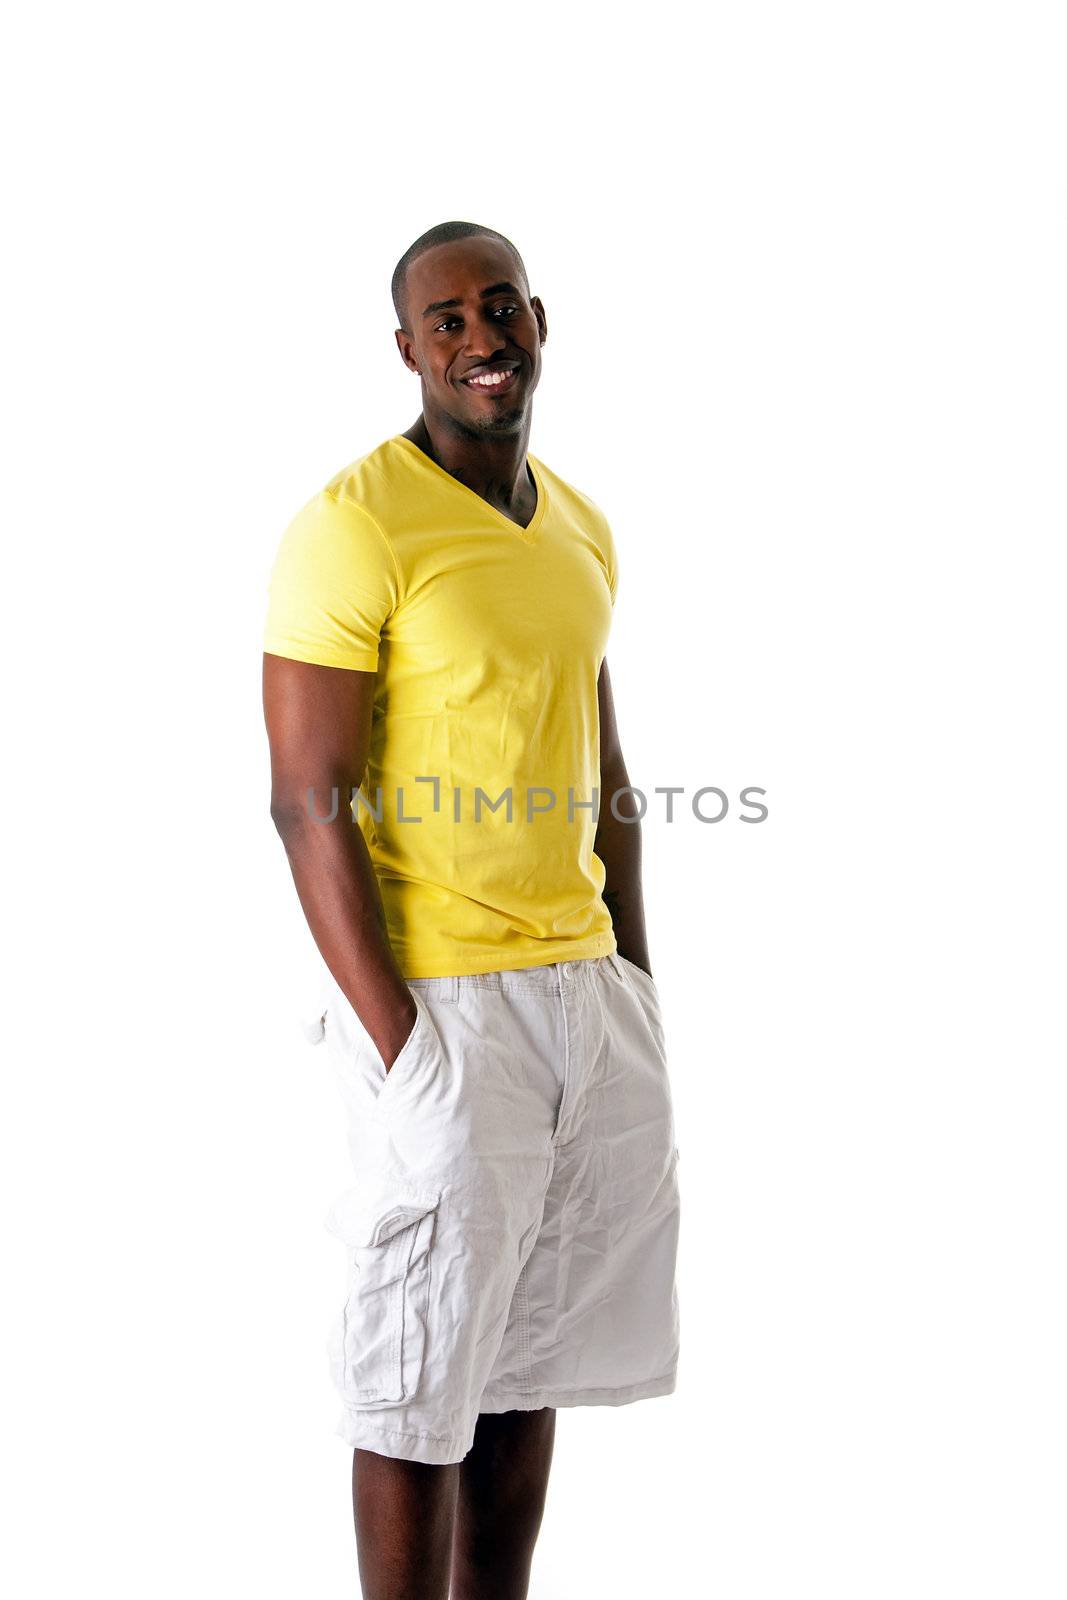 Handsome sporty African American man in yellow shirt and white shorts standing with hands in pocket and big smile, isolated